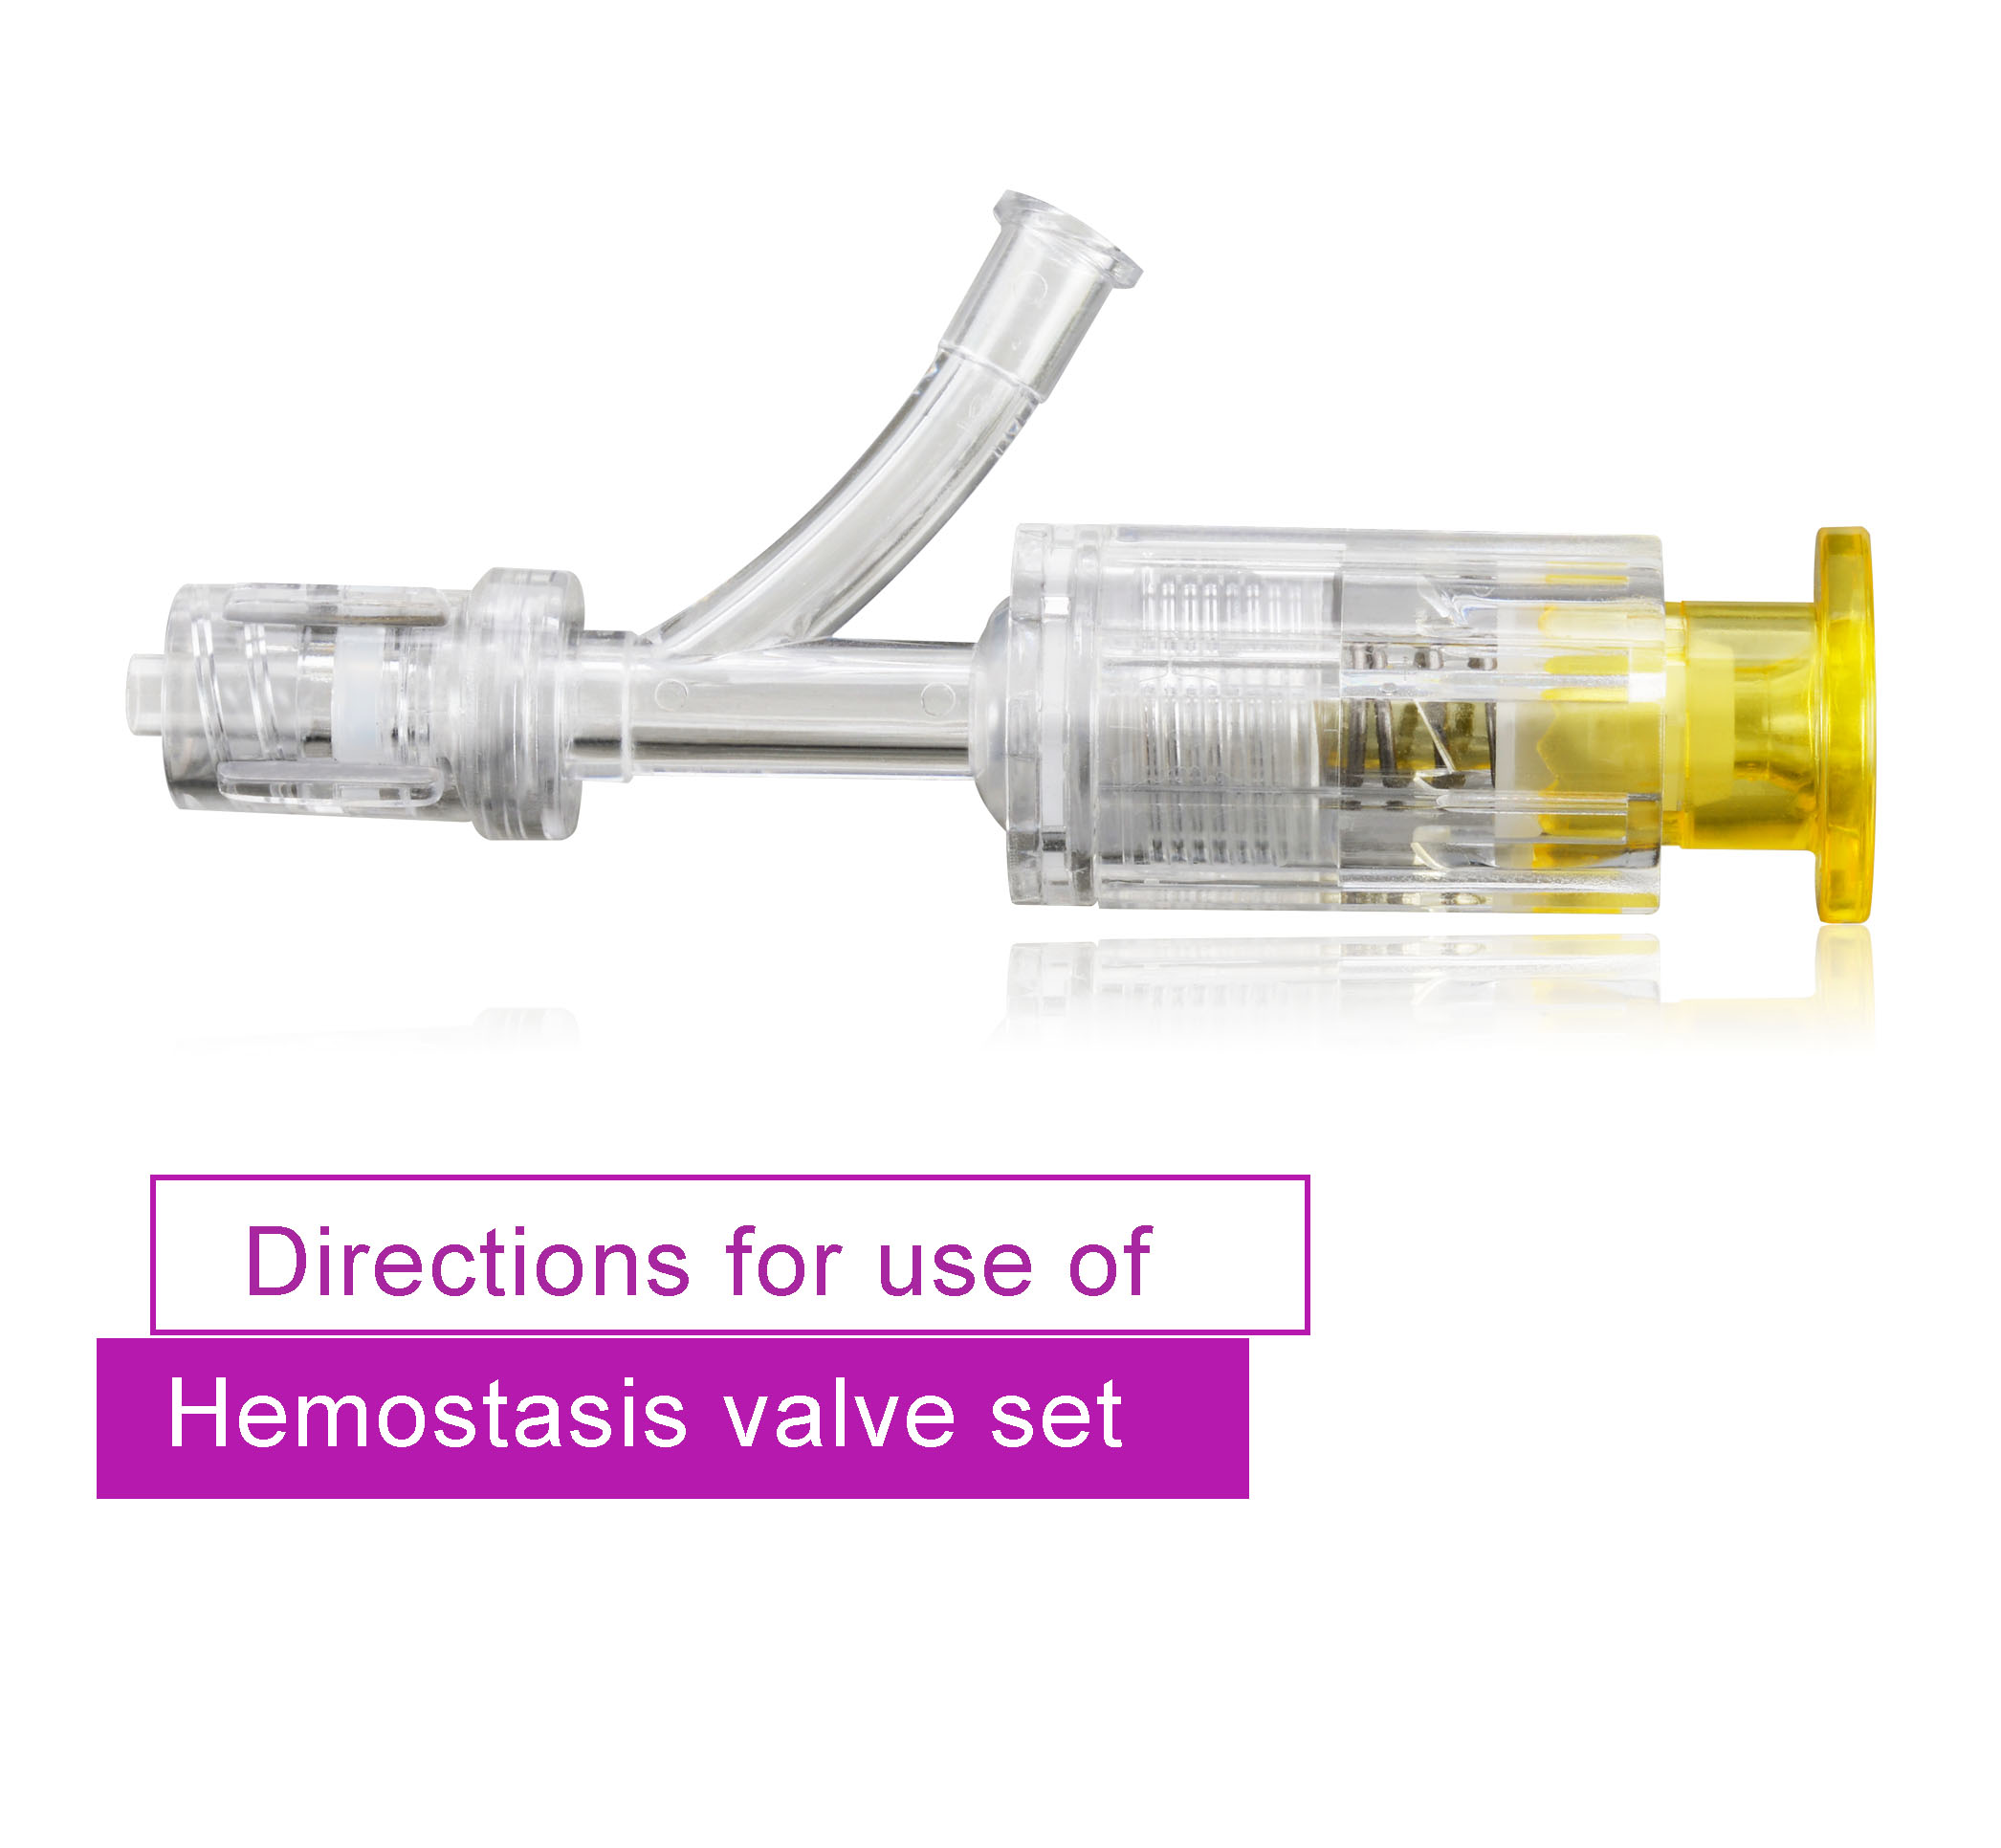 Directions for use of Disposable pressure transducers